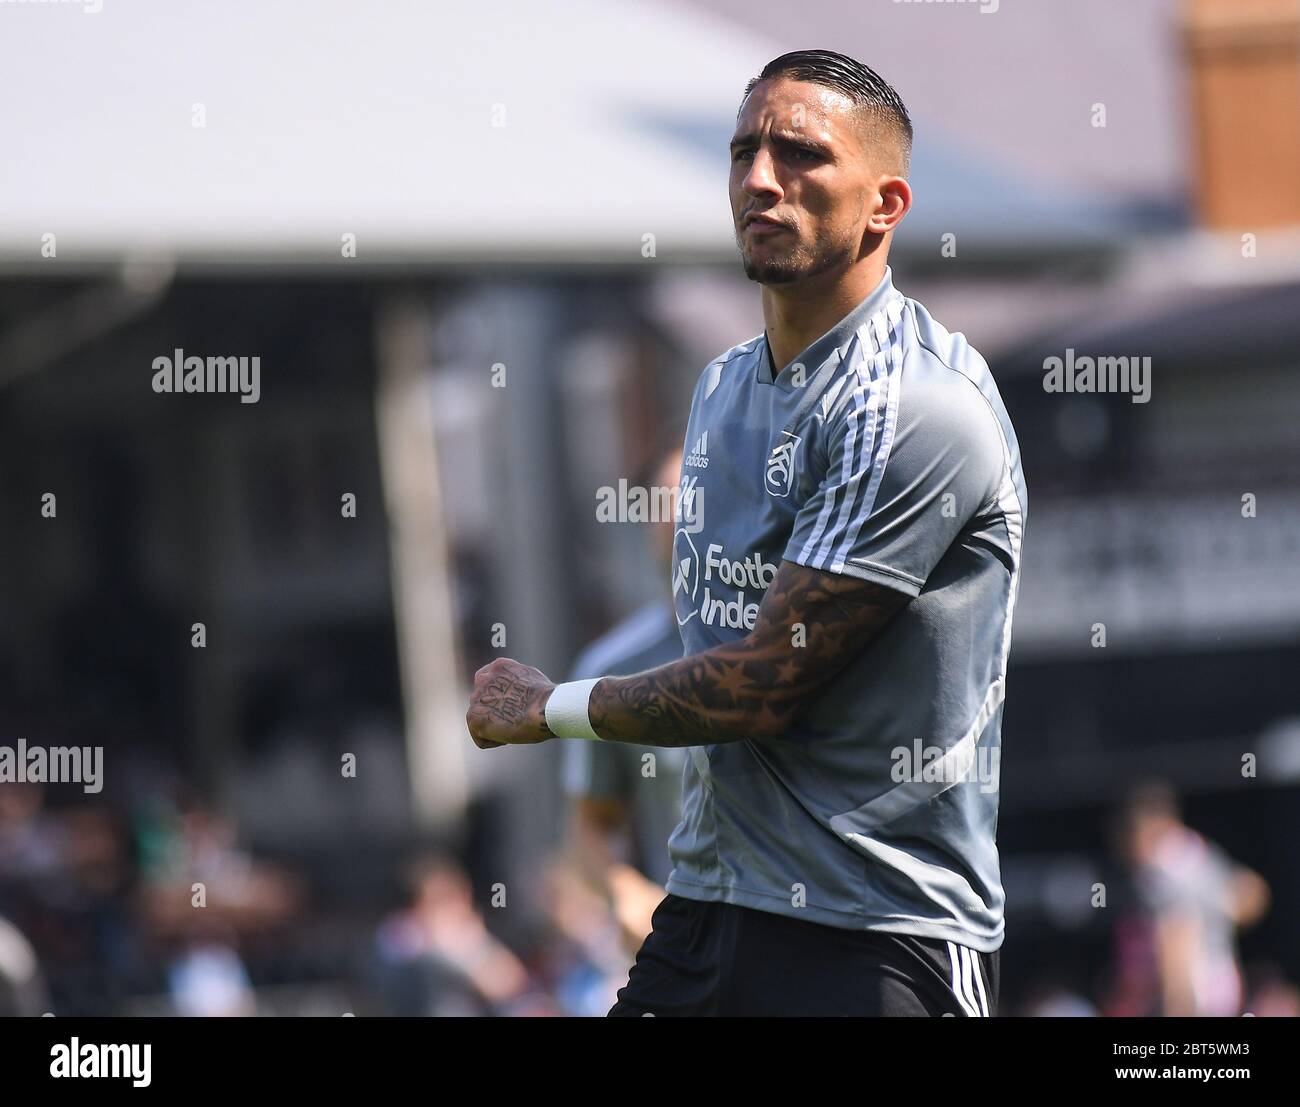 LONDON, ENGLAND - AUGUST 24, 2019: Anthony Knockaert of Fulham pictured during the 2019/20 EFL SkyBet Championship game between Fulham FC and Nottingham Forest FC at Craven Cottage. Stock Photo